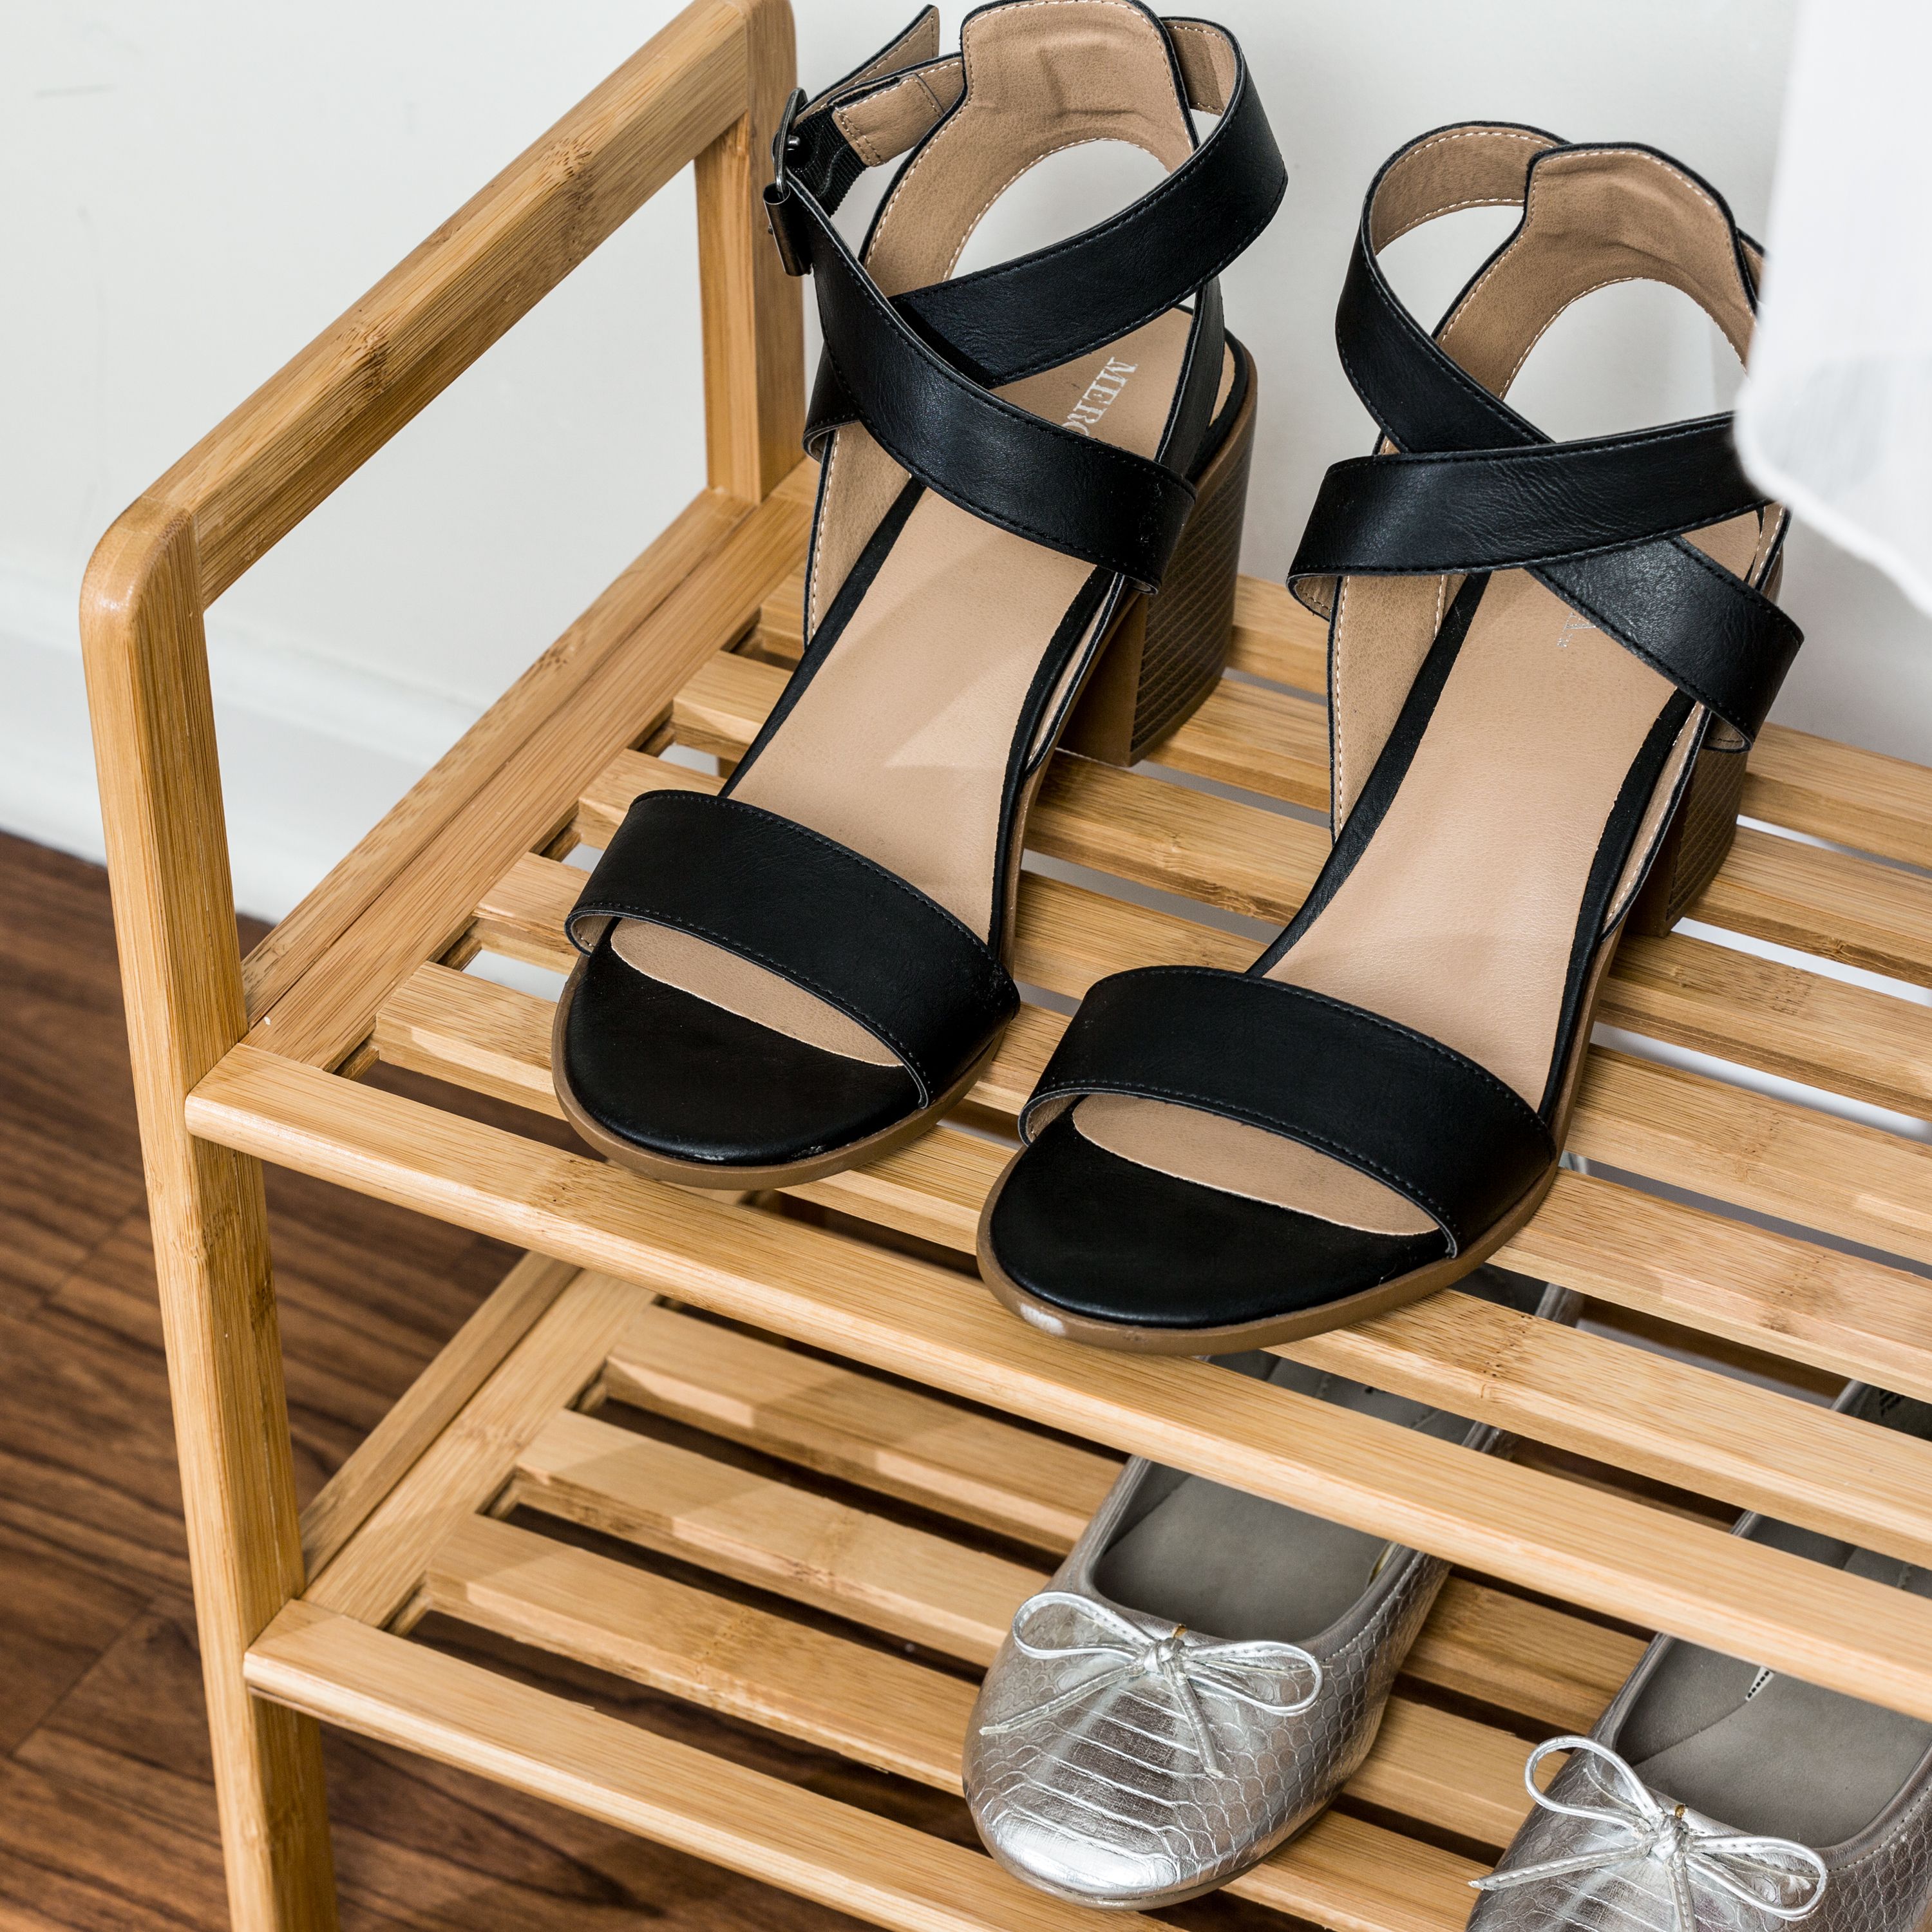 Honey Can Do 2-Tier Bamboo Shoe Rack, Natural - image 5 of 5